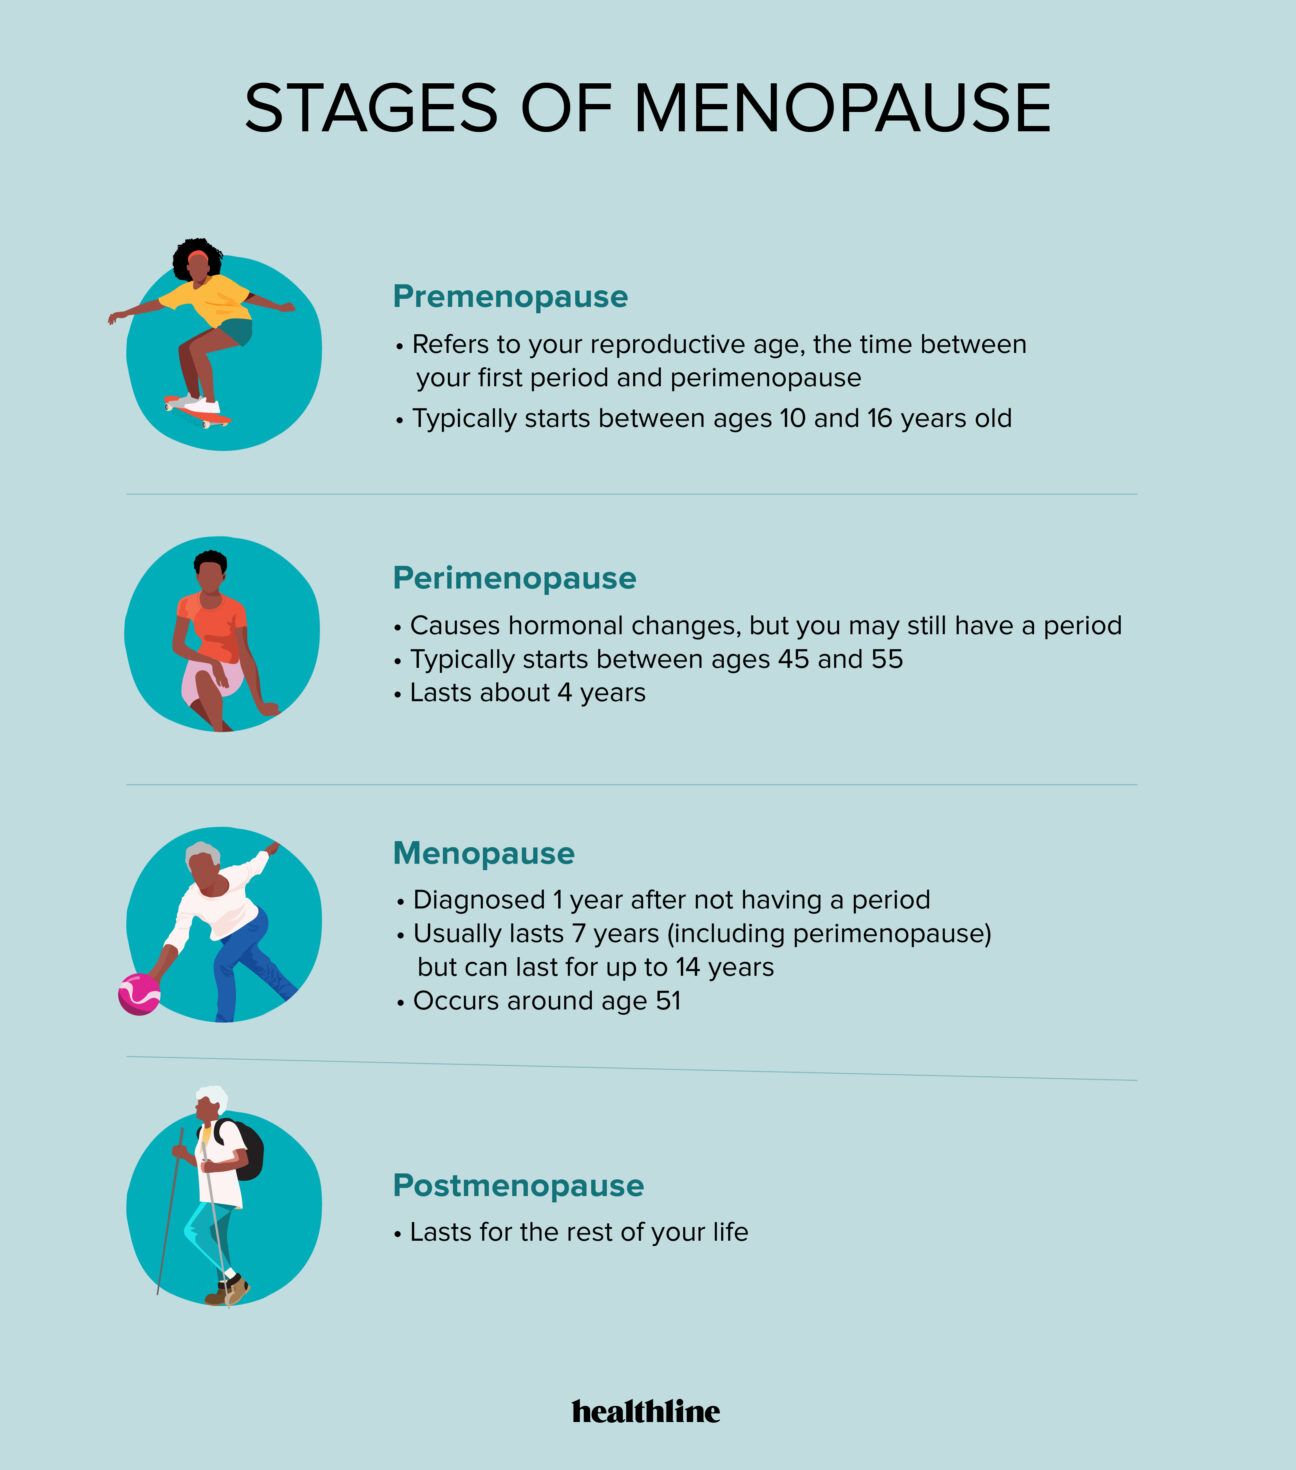 5 Menopause Home Tests: Which Is the Best?